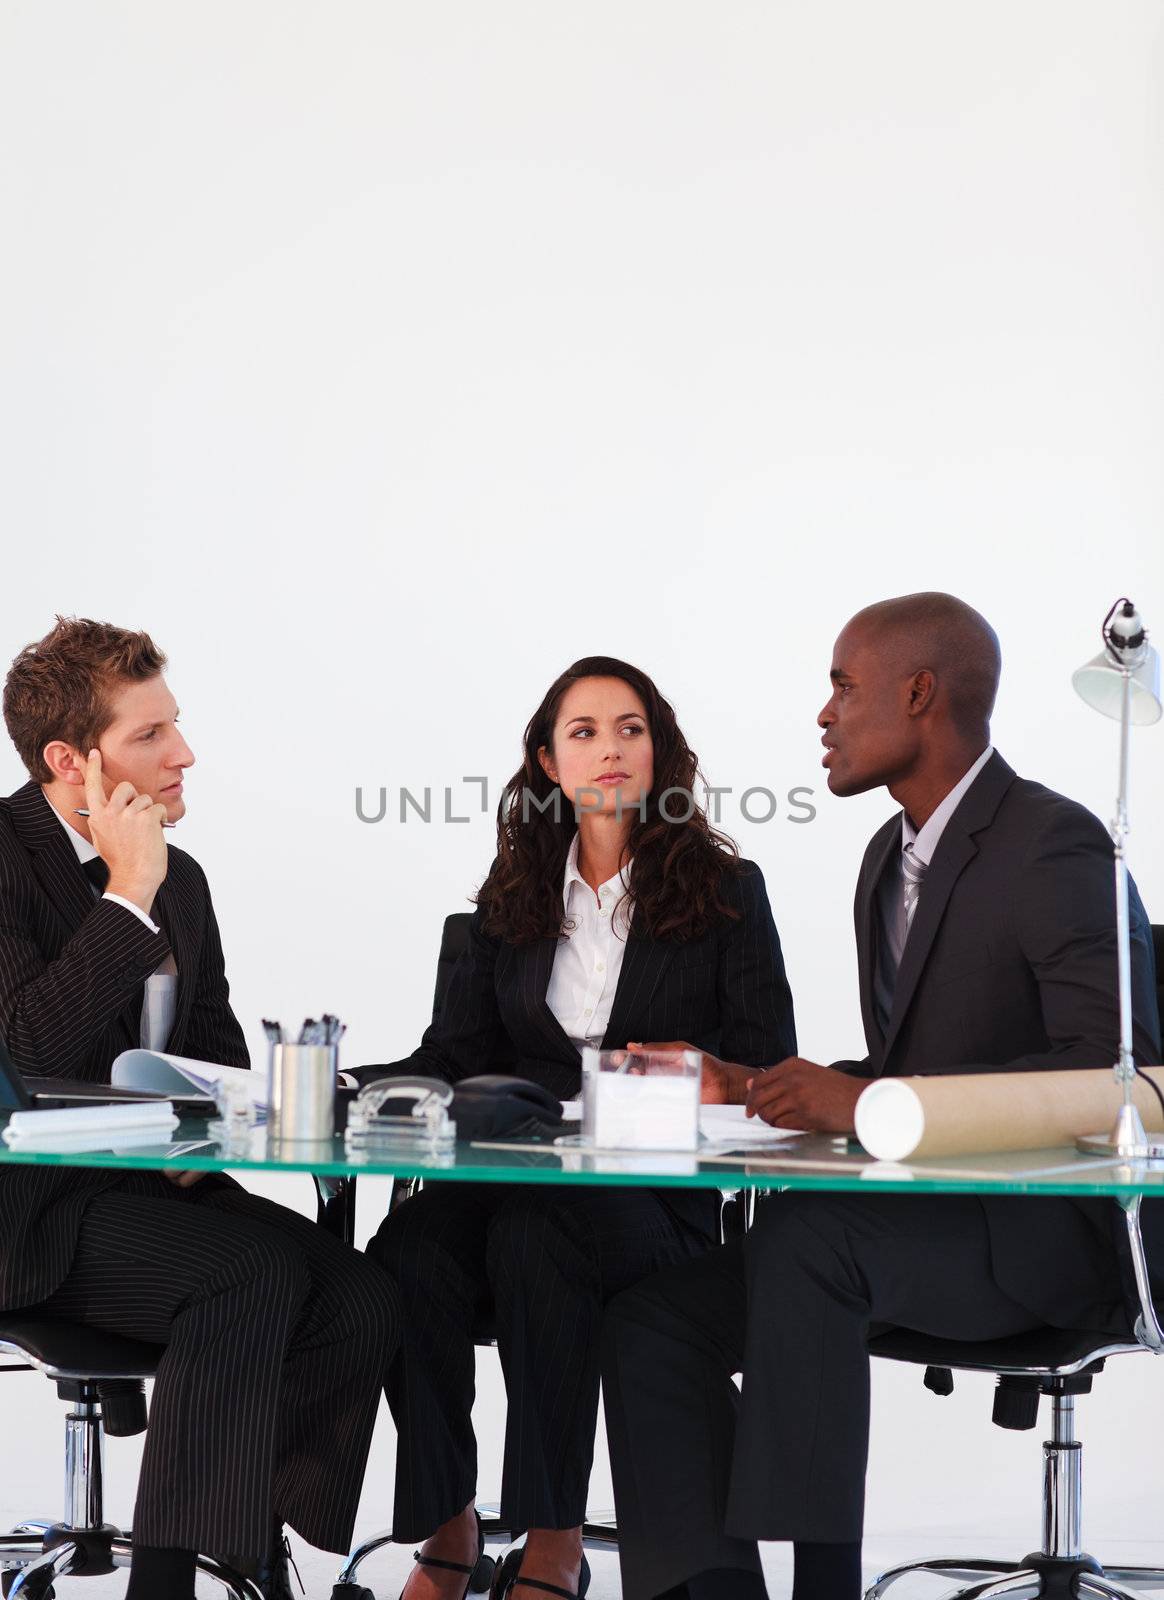 Business people discussing in a meeting by Wavebreakmedia